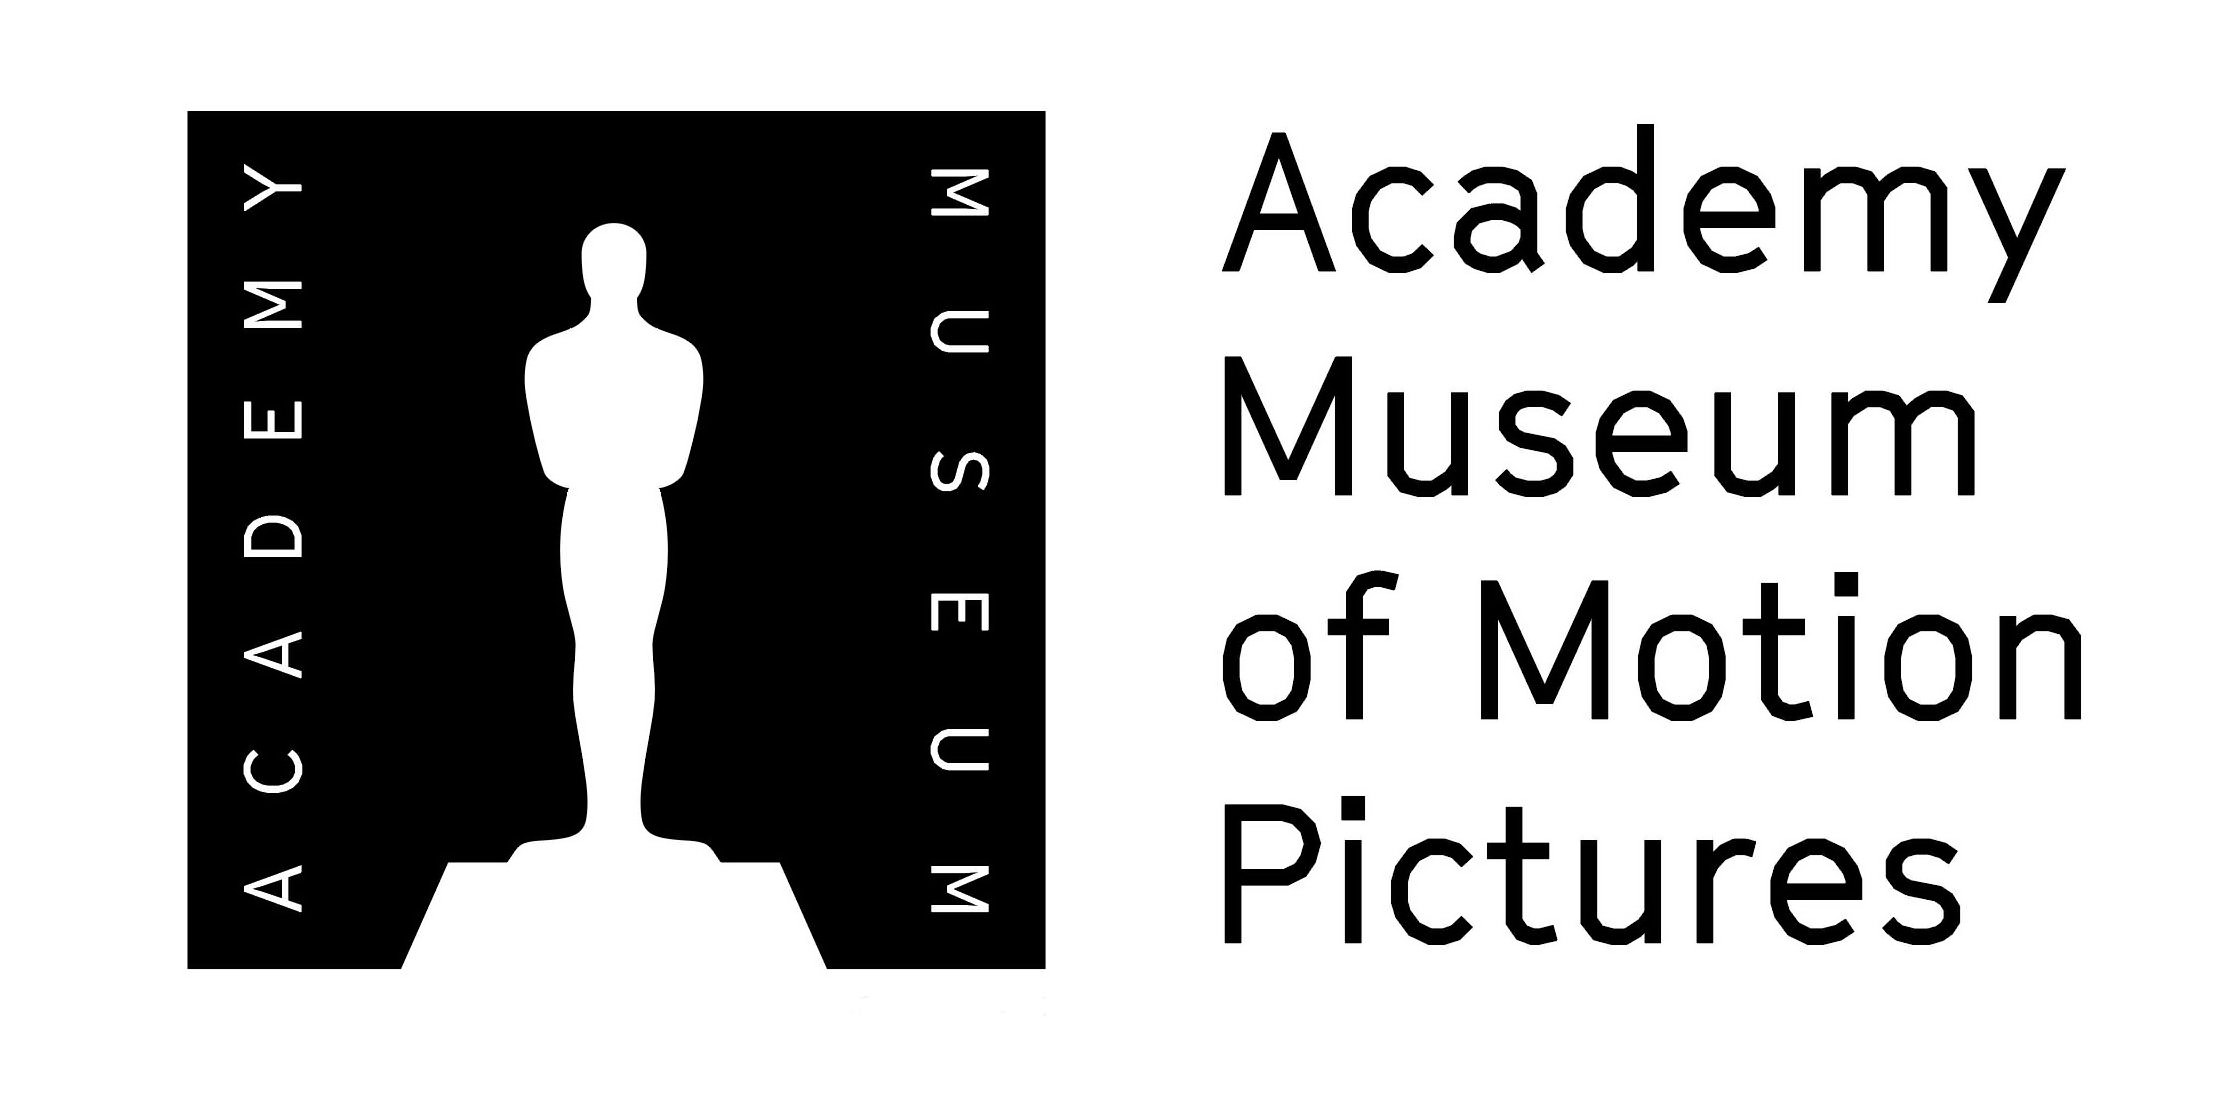  ACADEMY MUSEUM ACADEMY MUSEUM OF MOTIONPICTURES